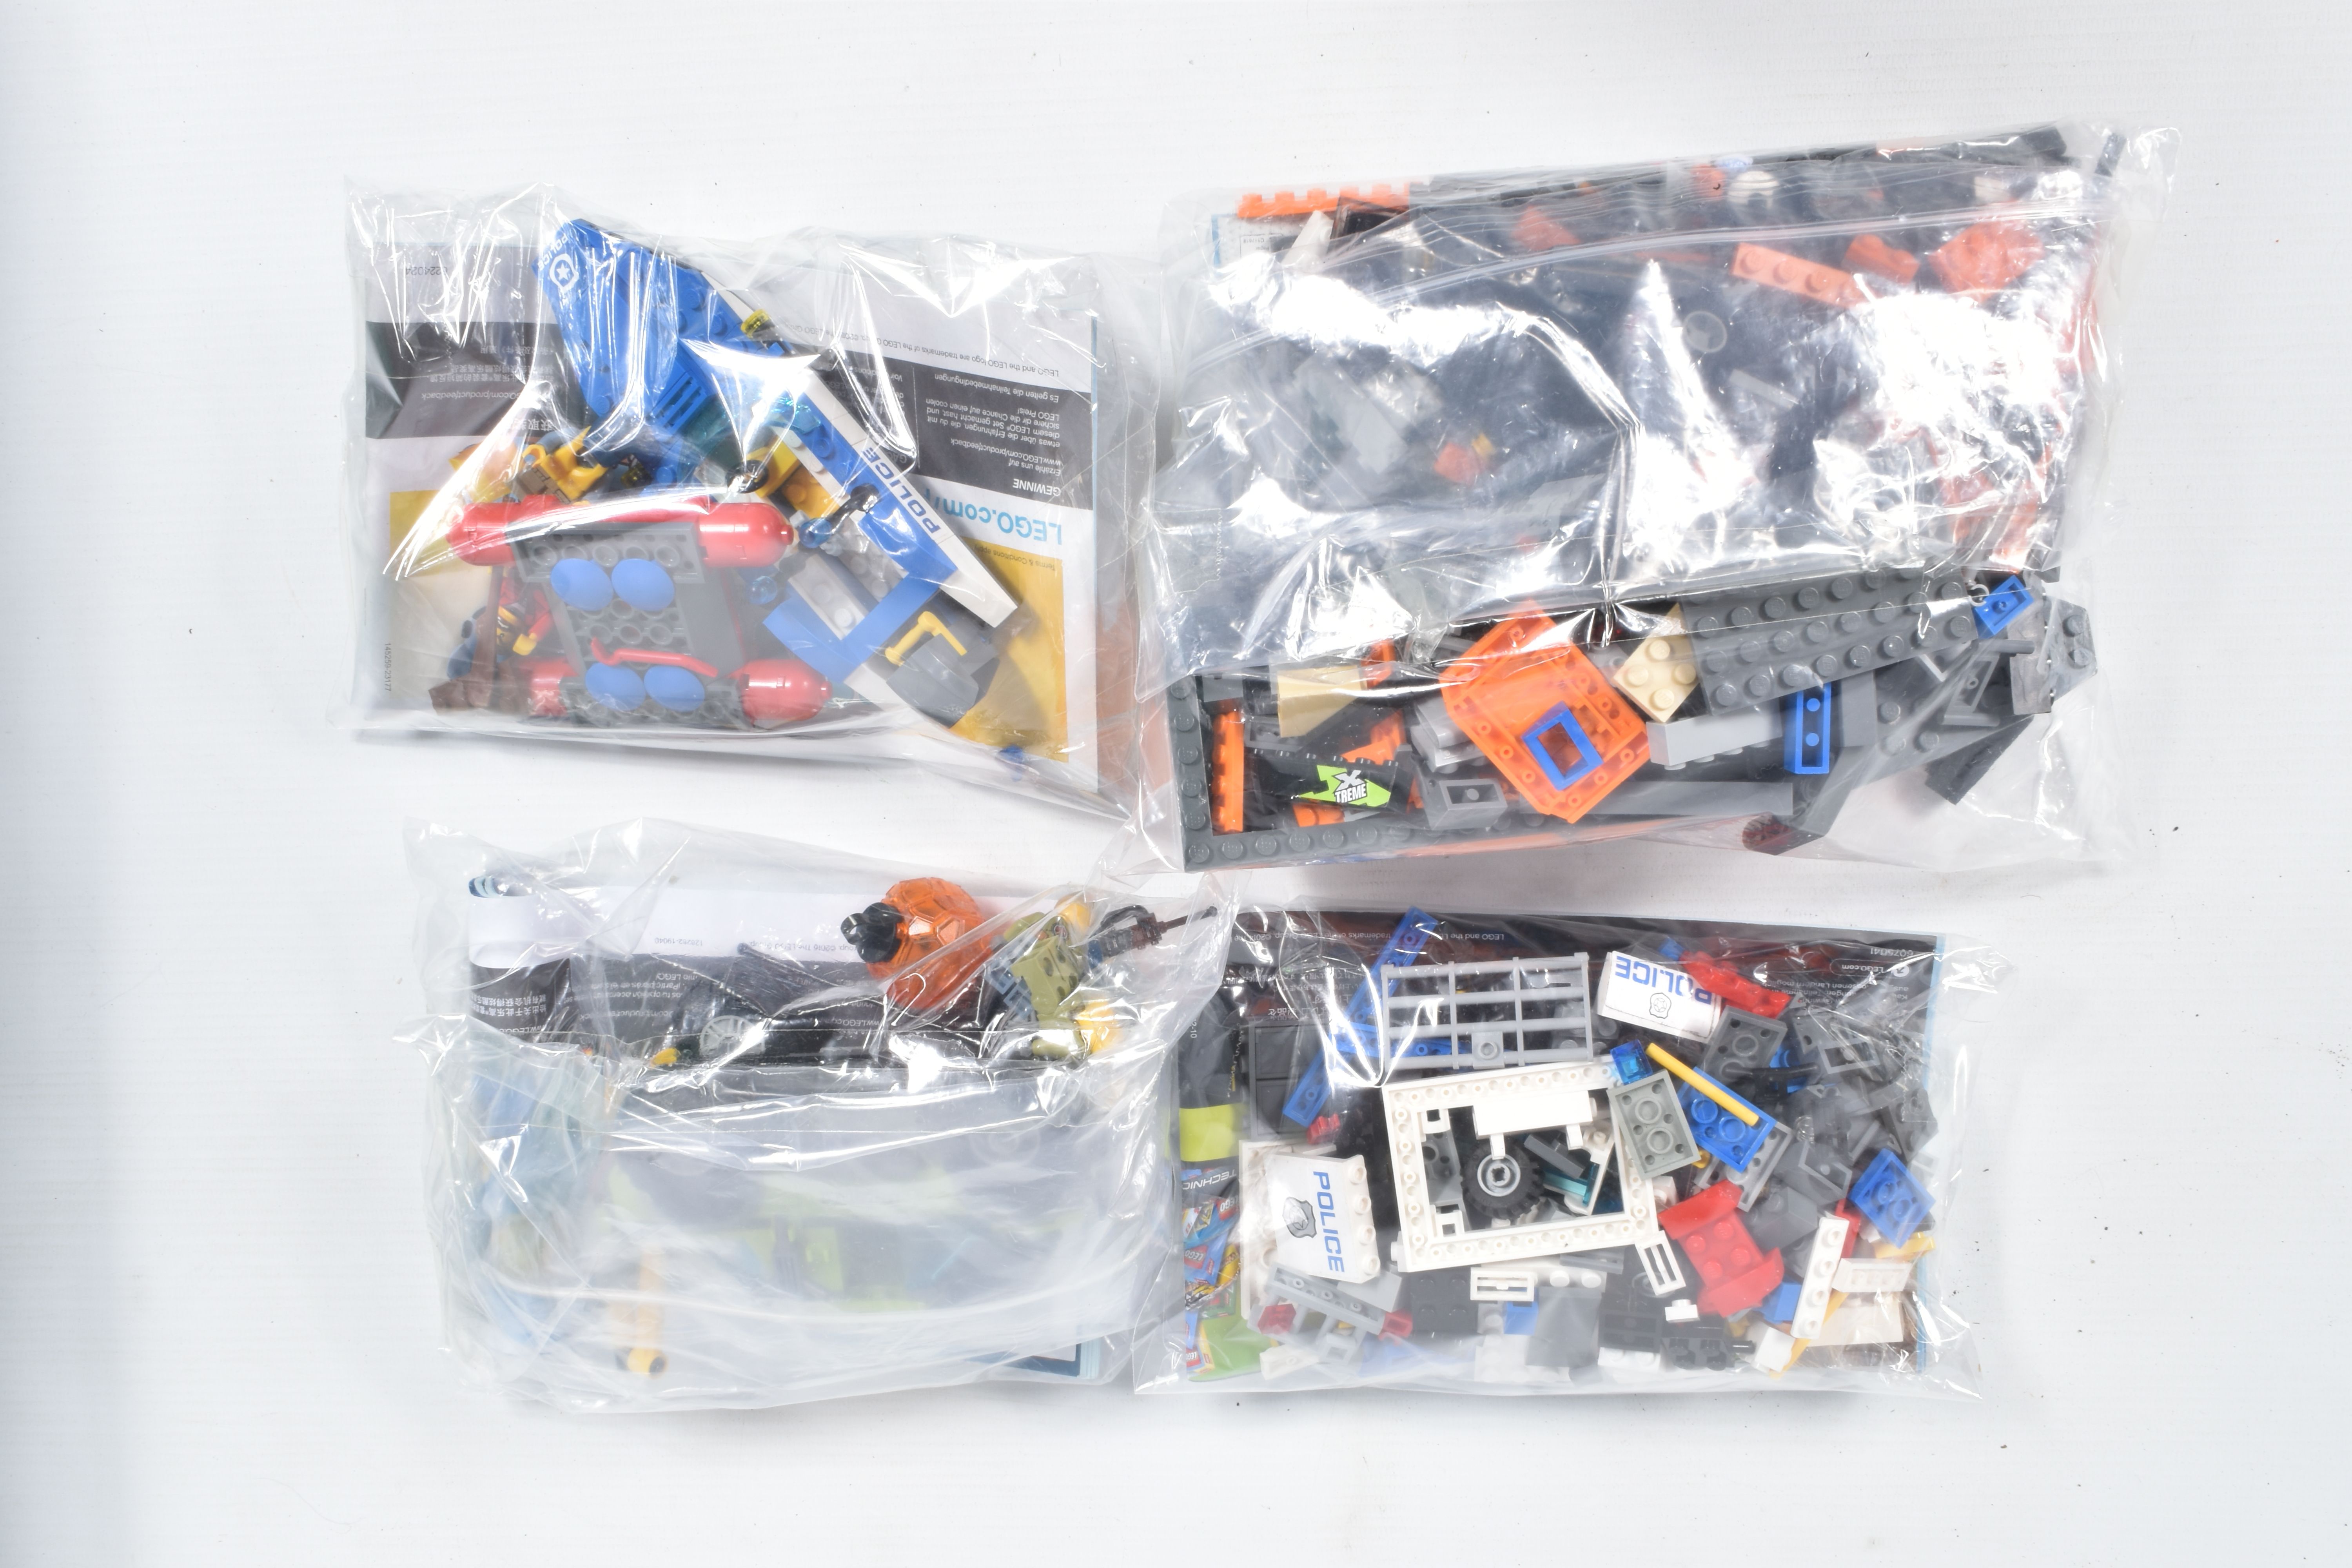 A COLLECTION OF ELEVEN UNBOXED LEGO CITY MODELS, each individually sealed with some models built, - Image 5 of 7